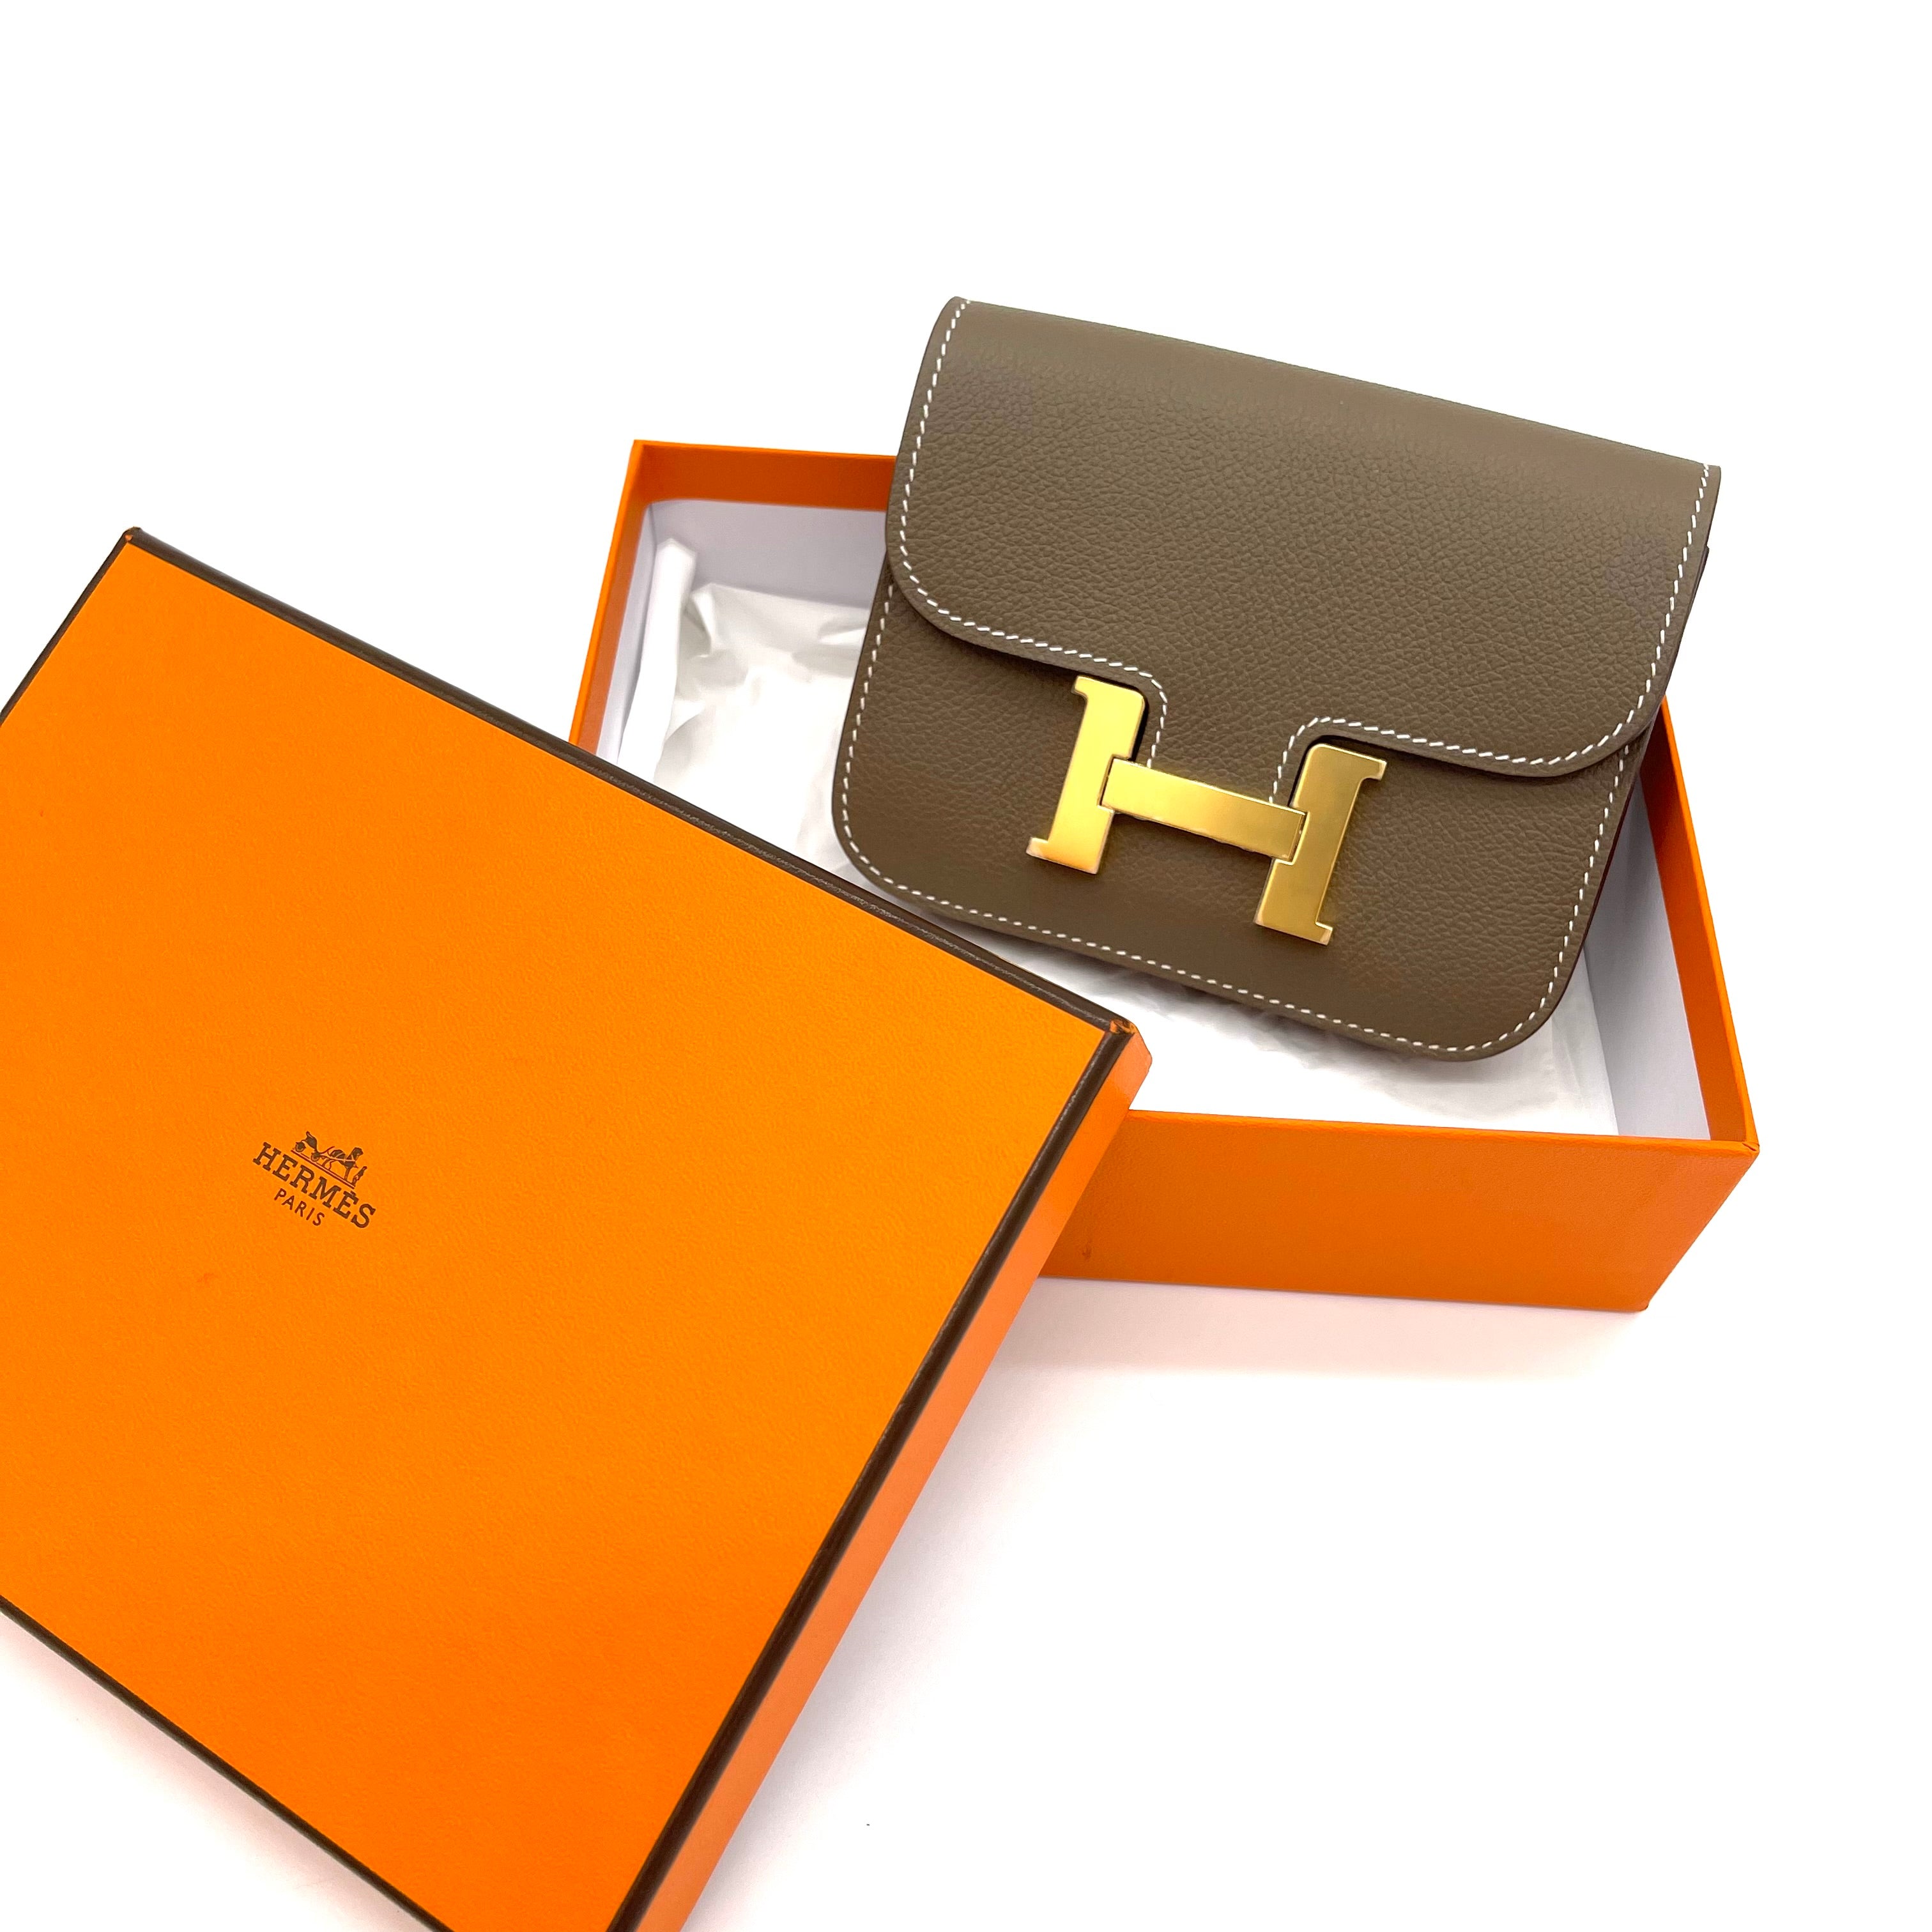 Hermes Etoupe Constance Slim Wallet New Condition Never used